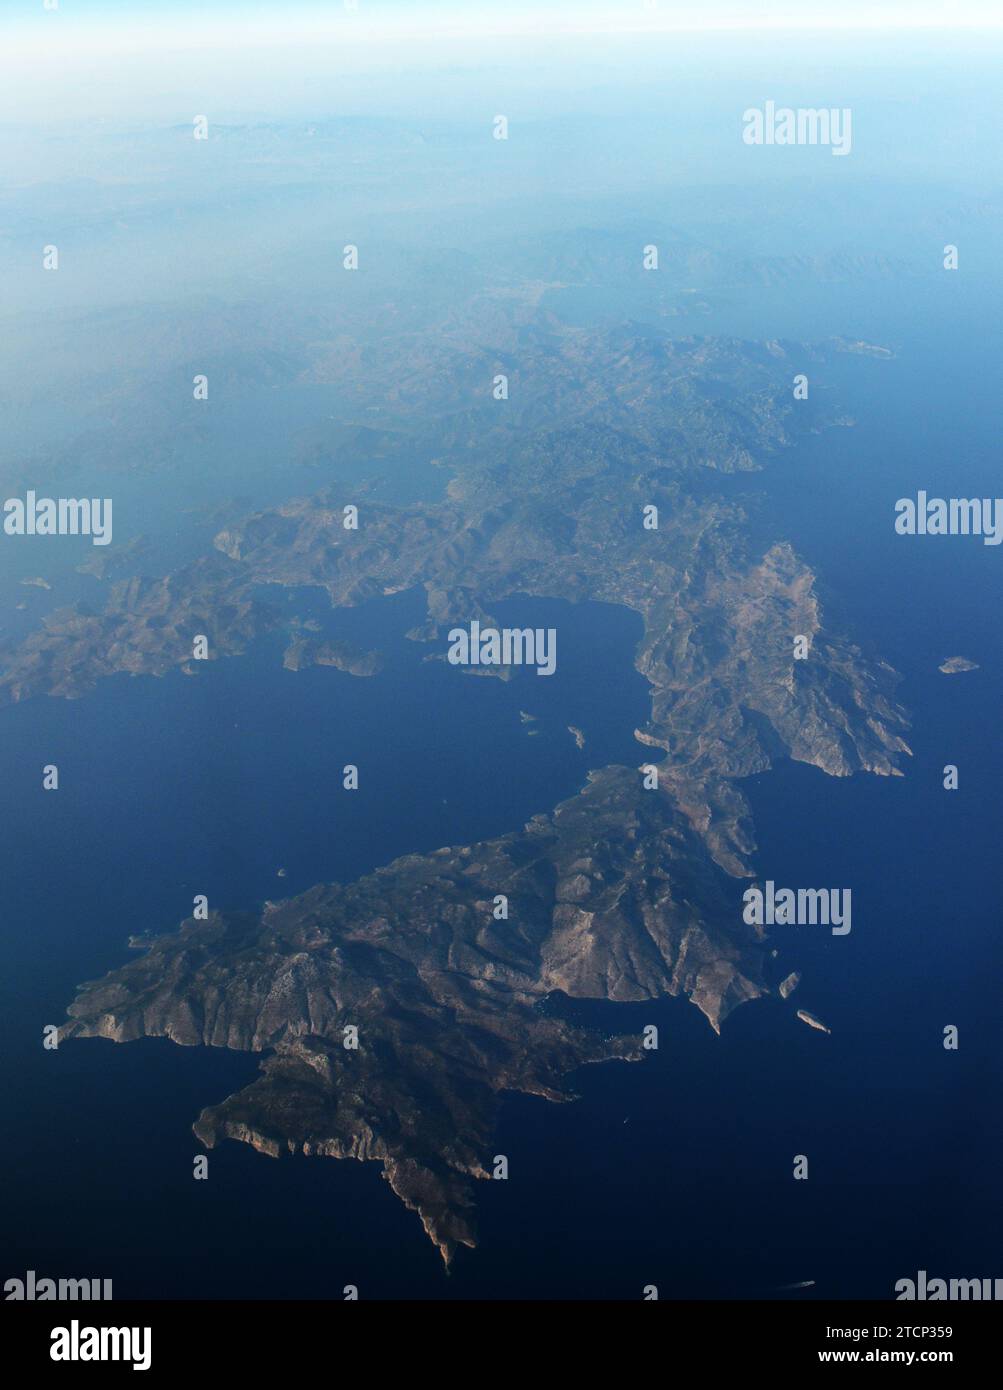 Aerial view of Islands in the Aegean sea. Stock Photo